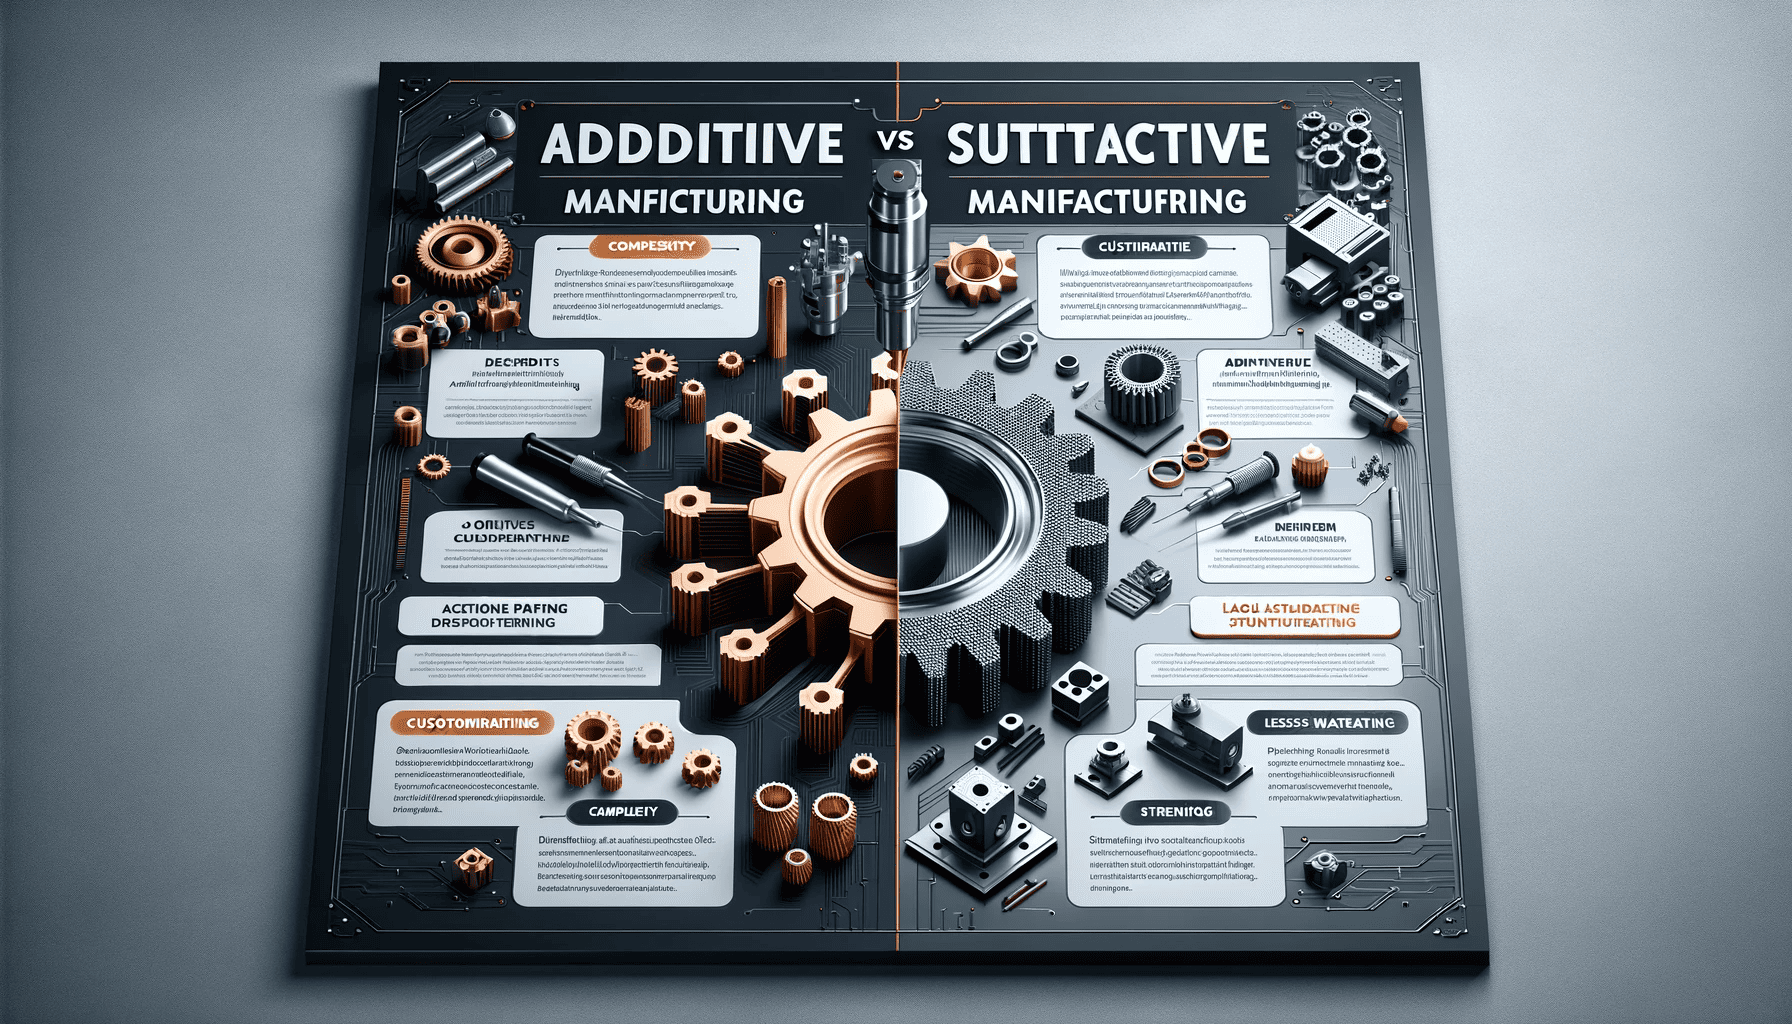 Exploring the Benefits of Additive Manufacturing Over Traditional Subtractive Techniques